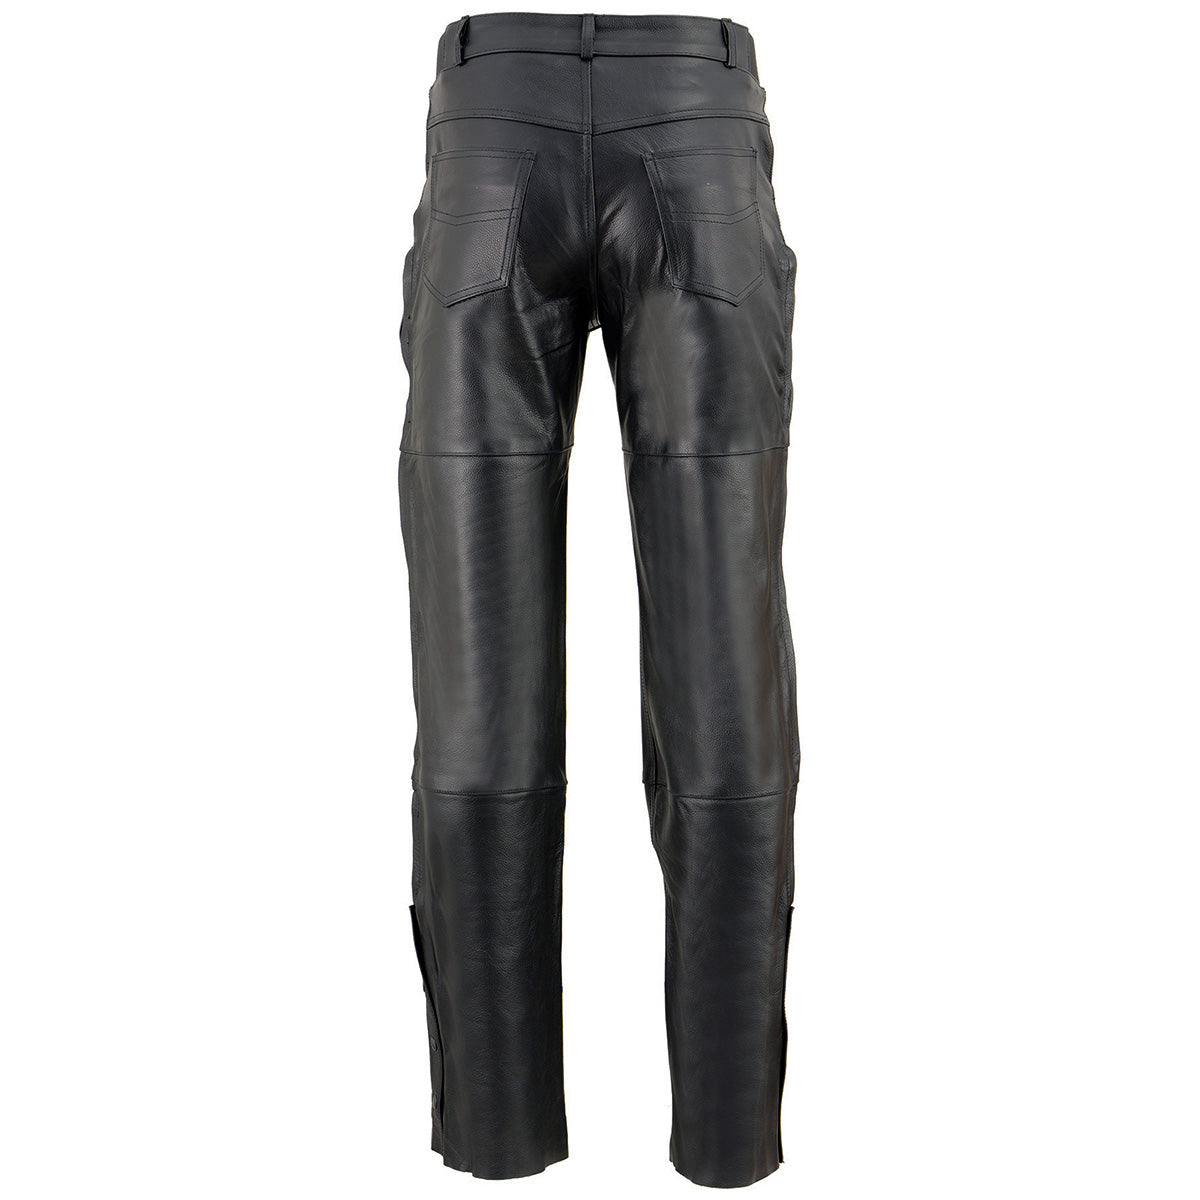 Milwaukee Leather SH1150 Men's Black Leather Motorcycle Over Pants with Jean Style Pockets